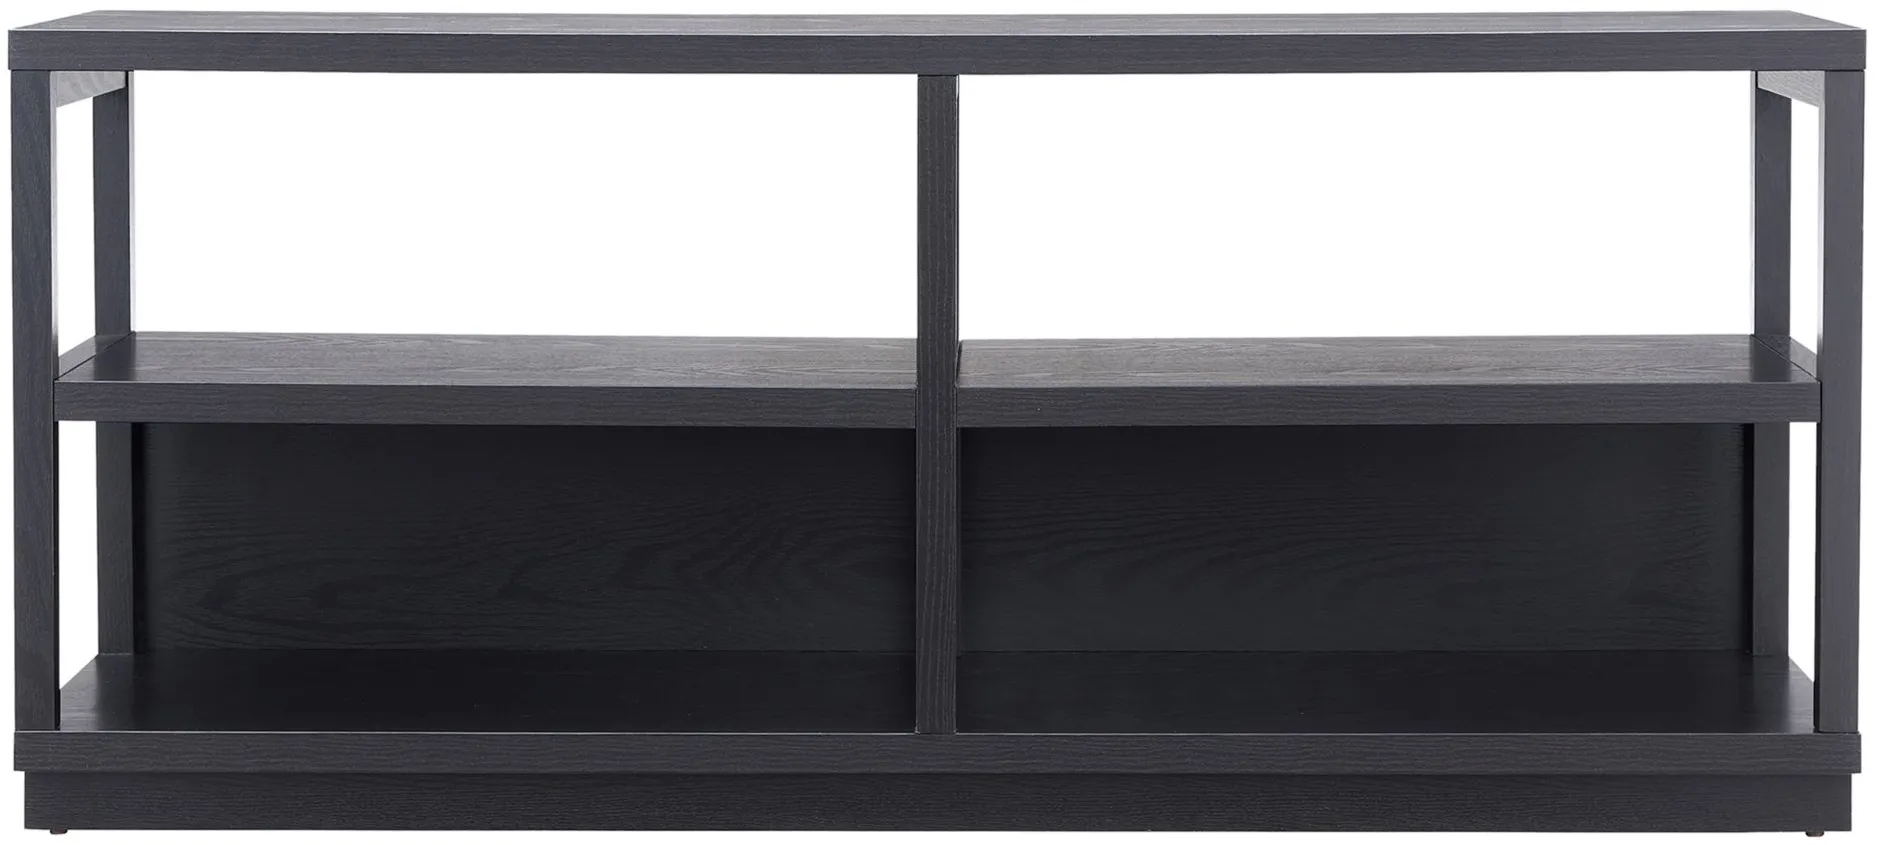 Nicole Brooks TV Stand in Black by Hudson & Canal